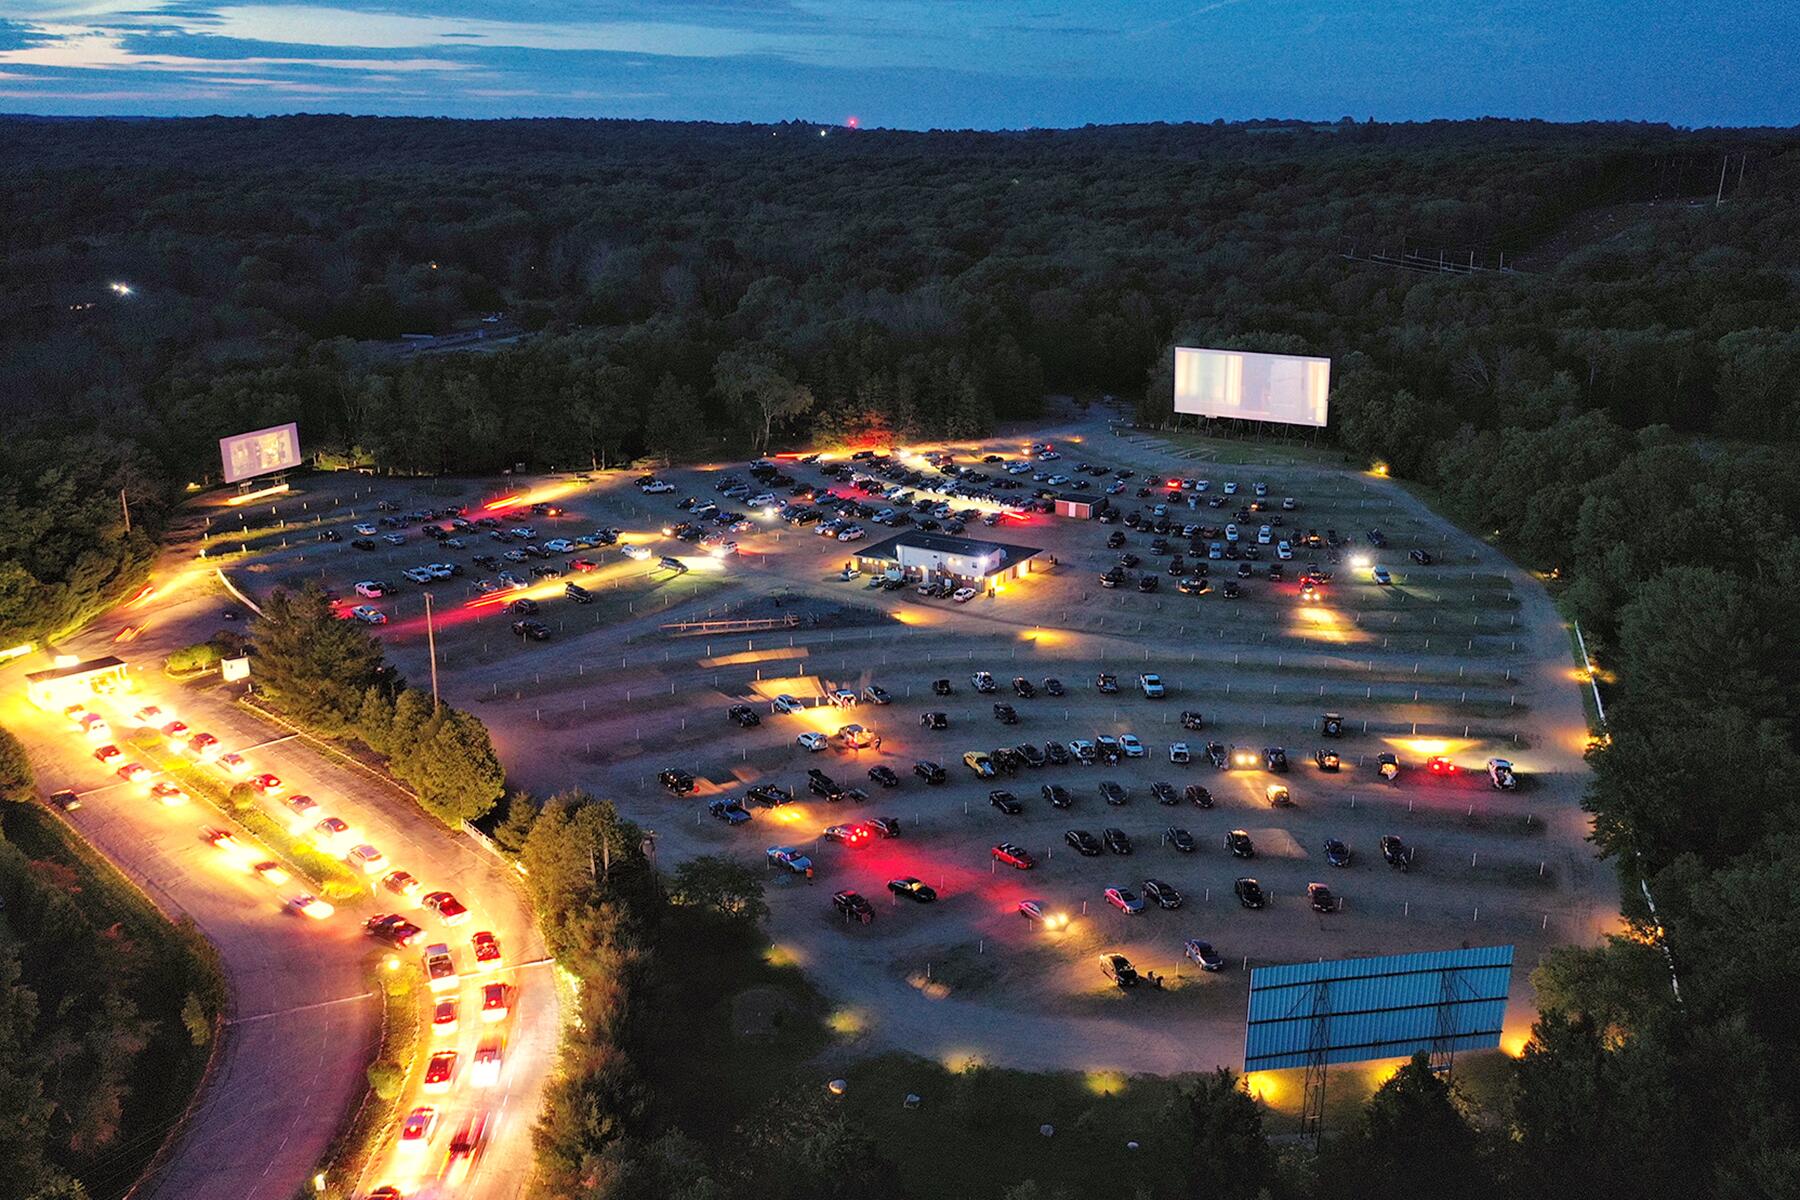 10 of the Best Drive-In Movie Theaters Around the United States